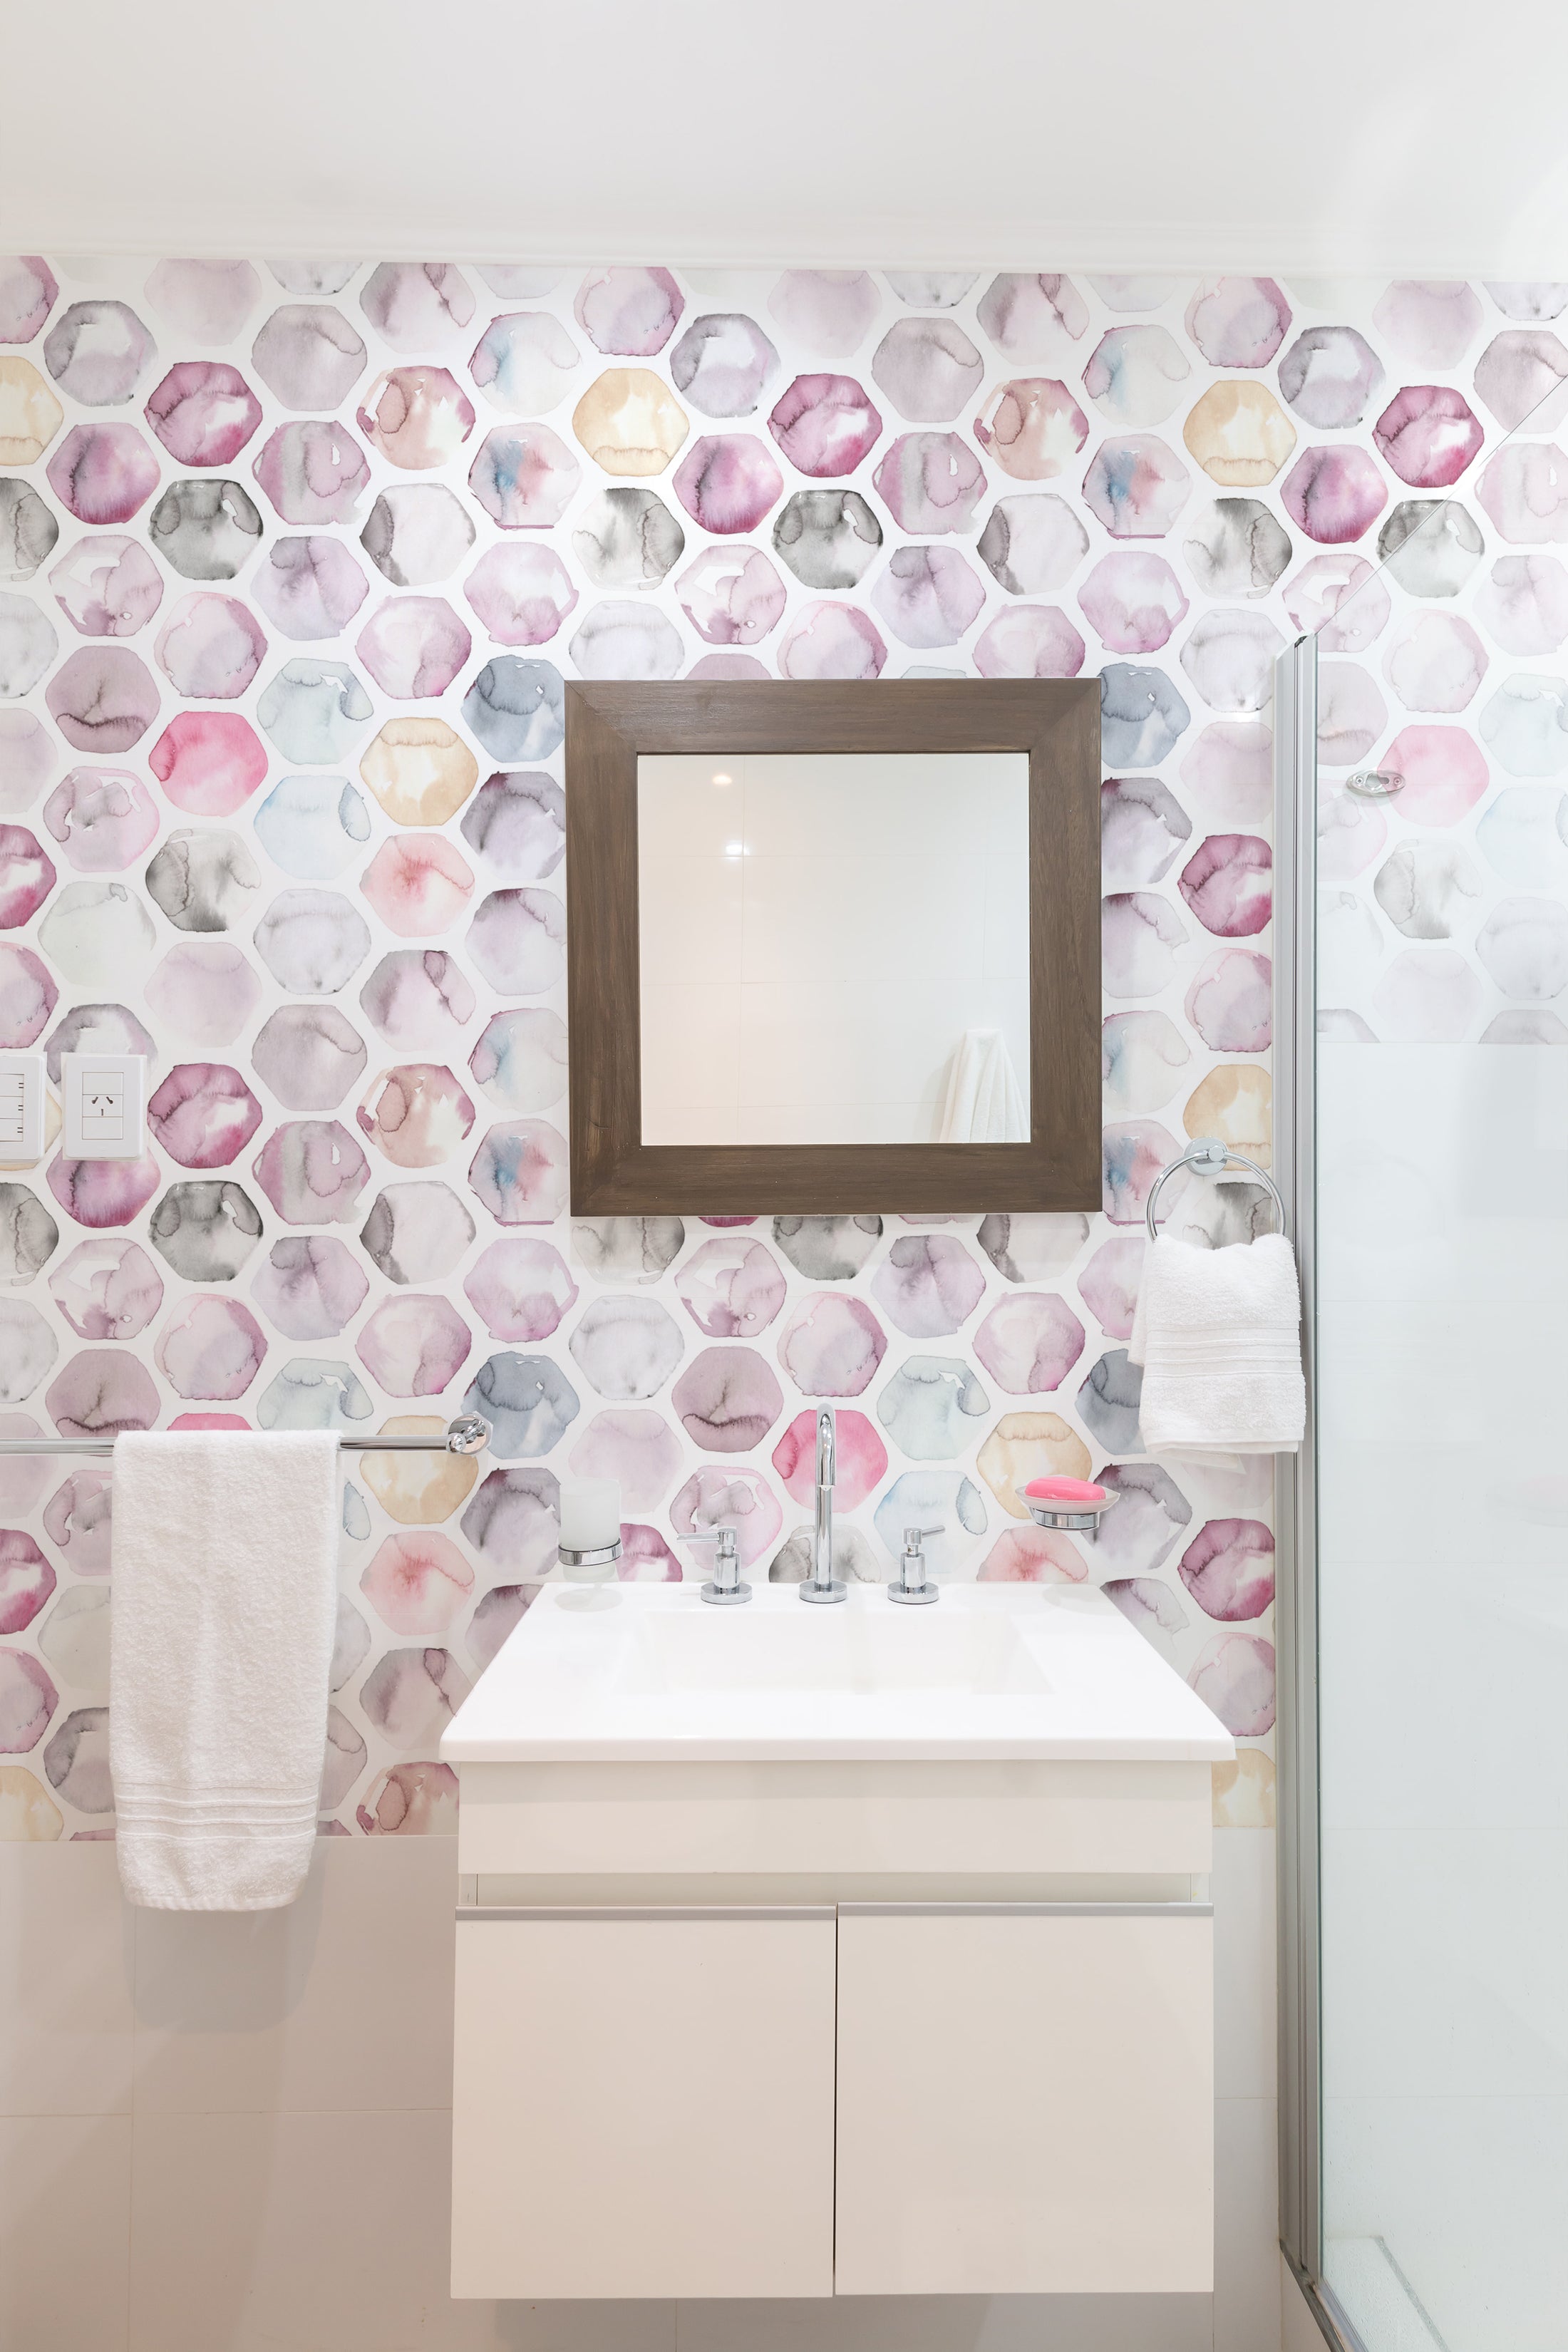 A modern bathroom interior showcasing the Watercolour Honeycomb Wallpaper with a unique pattern of soft watercolor shapes resembling a honeycomb, in muted shades of pink, purple, blue, and beige, adding an artistic and soothing ambiance.